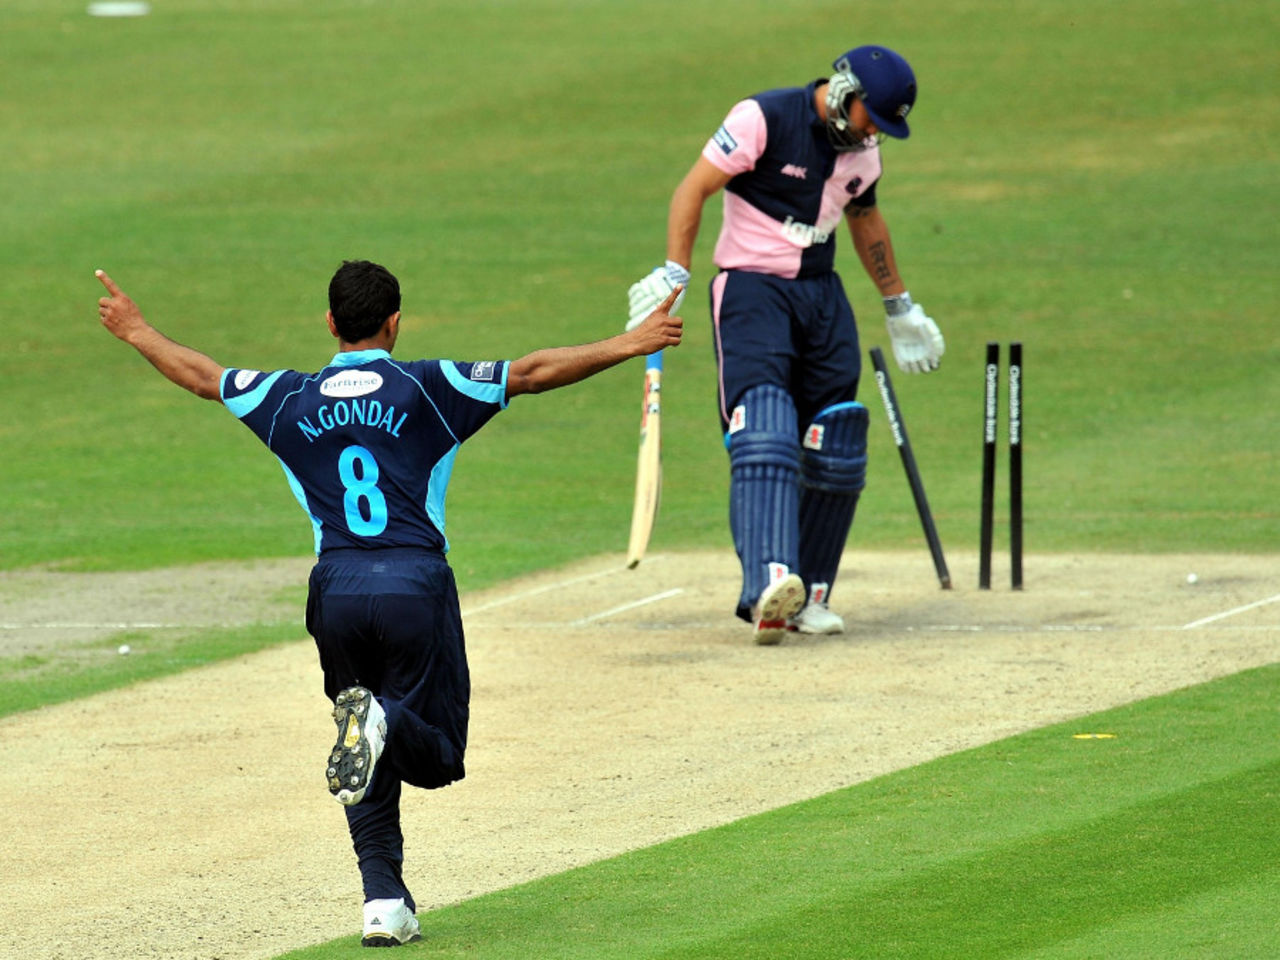 Scott Newman was bowled by Naved Arif as Middlesex lost early wickets, Sussex v Middlesex, CB40, Hove, May 8, 2011